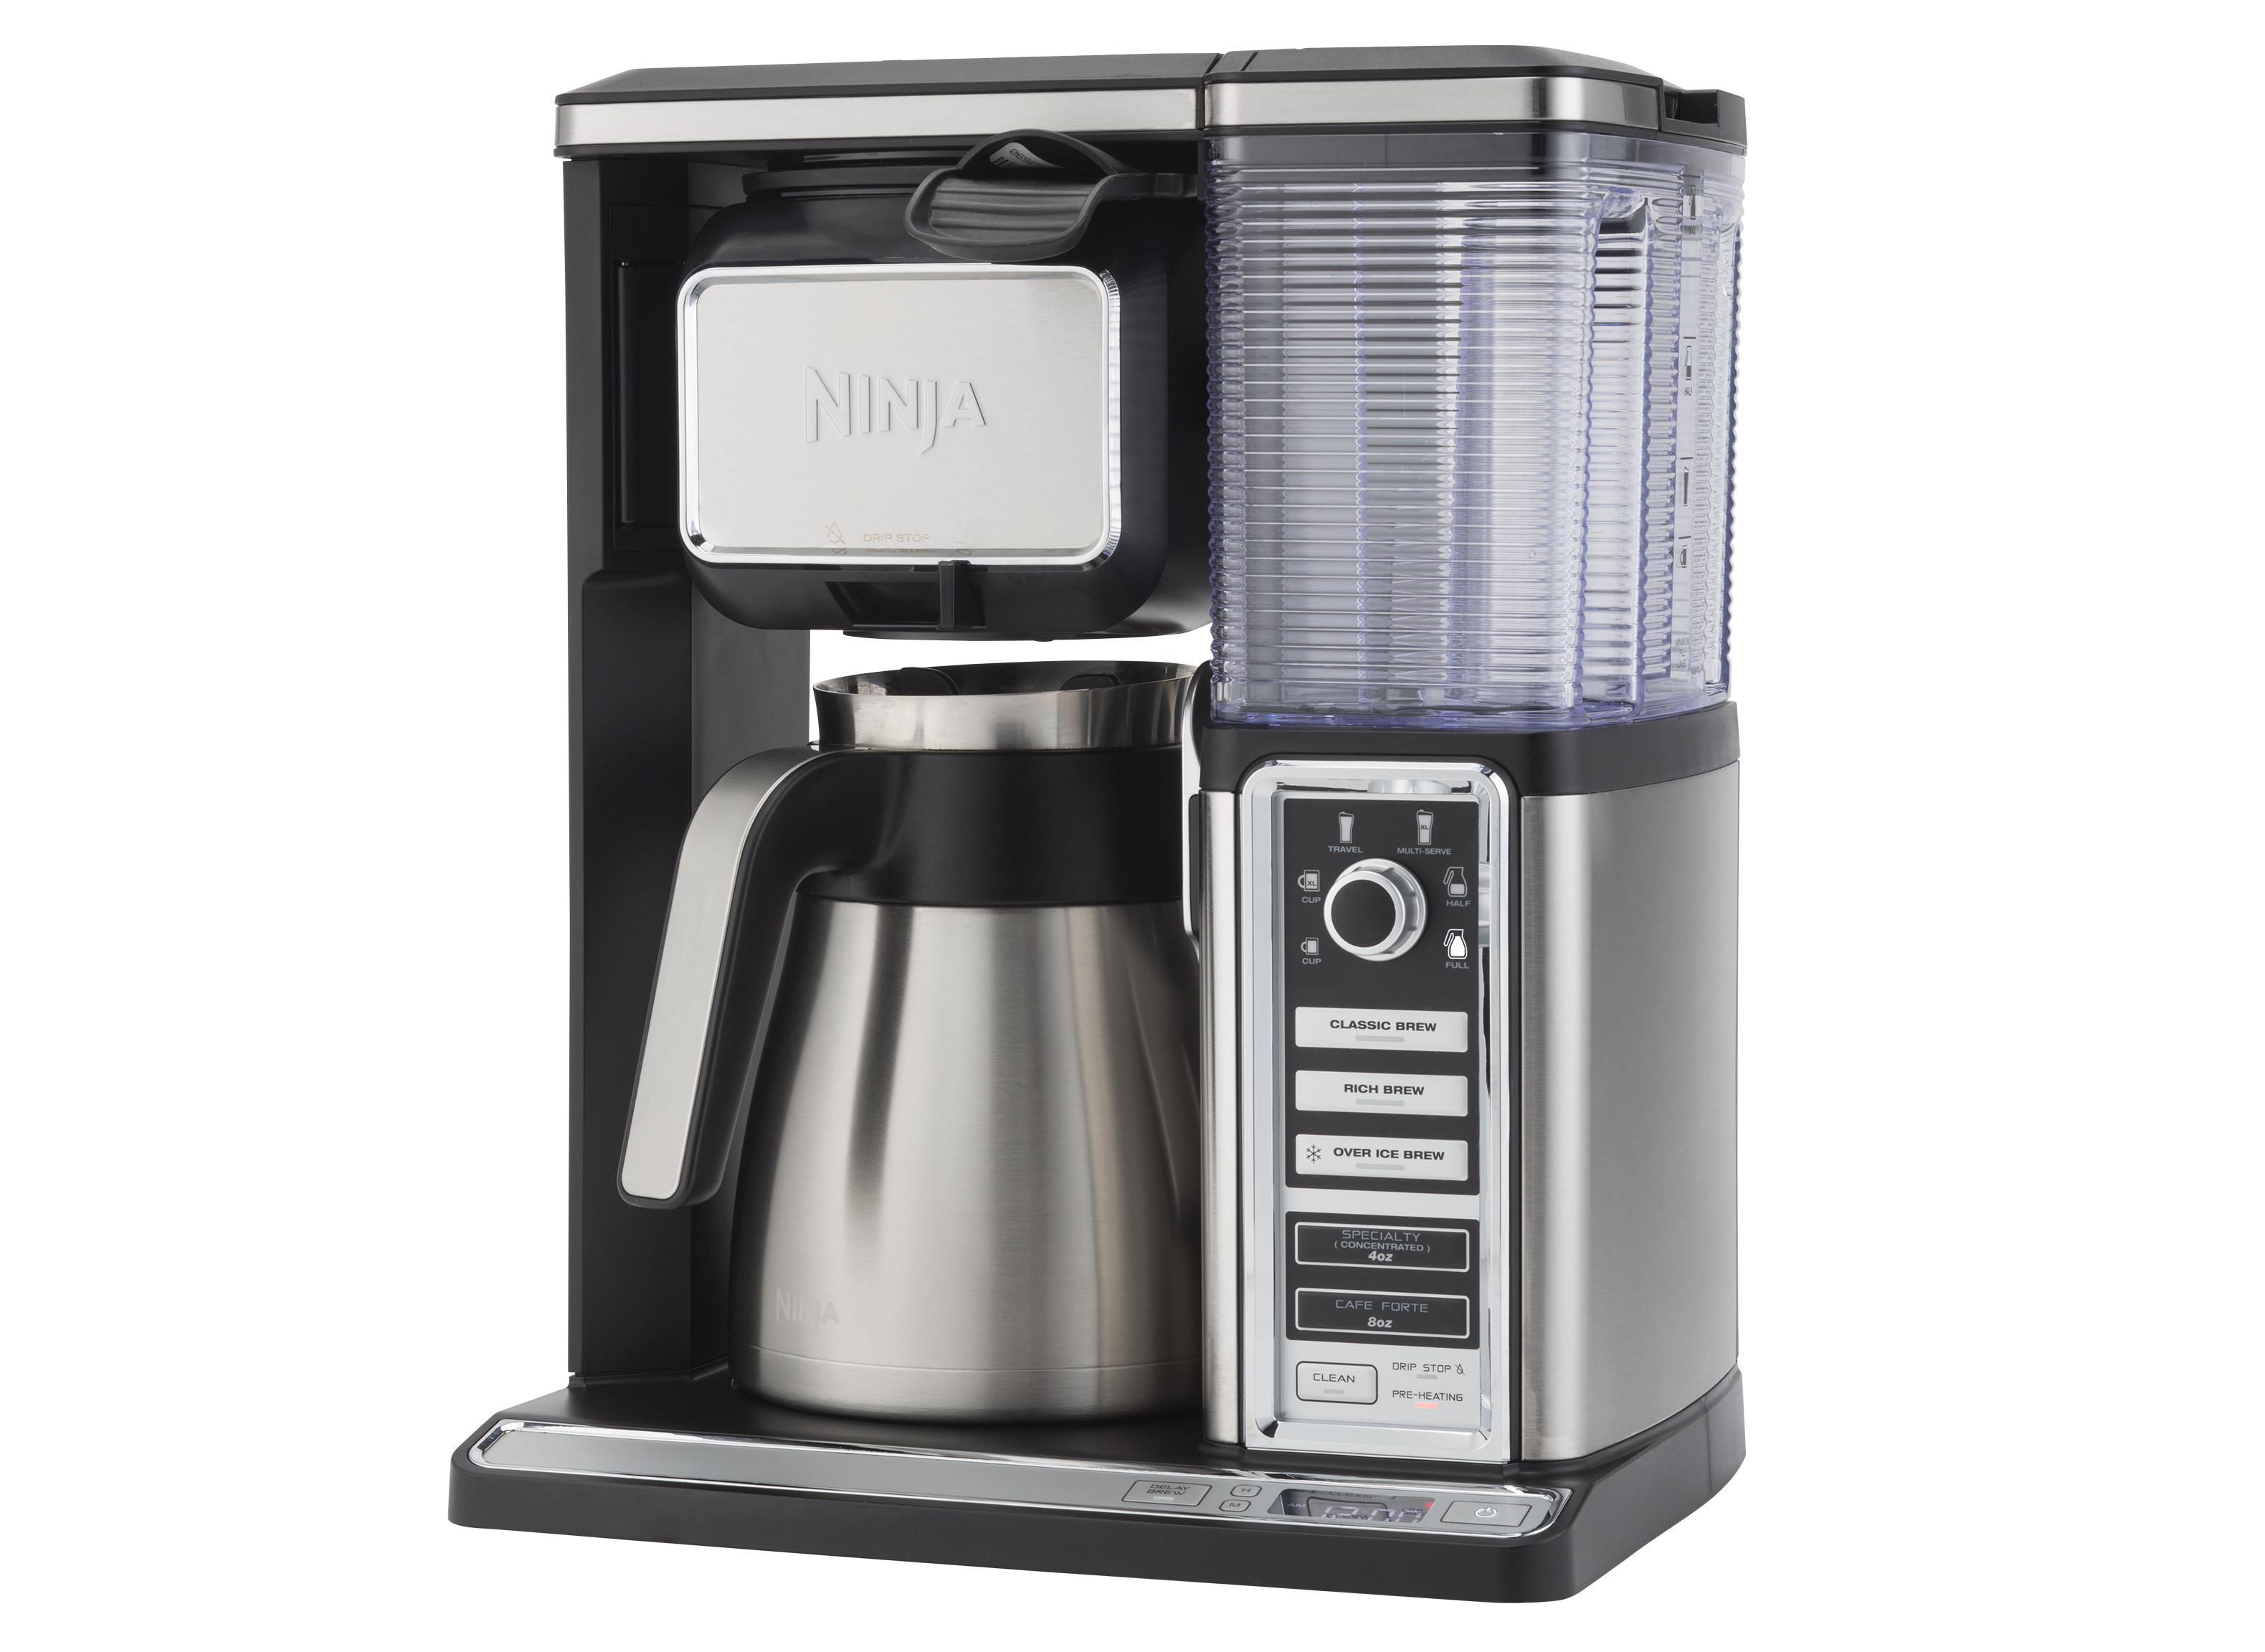 https://crdms.images.consumerreports.org/prod/products/cr/models/388208-coffeemakers-ninja-coffeebarsystemcf097.png